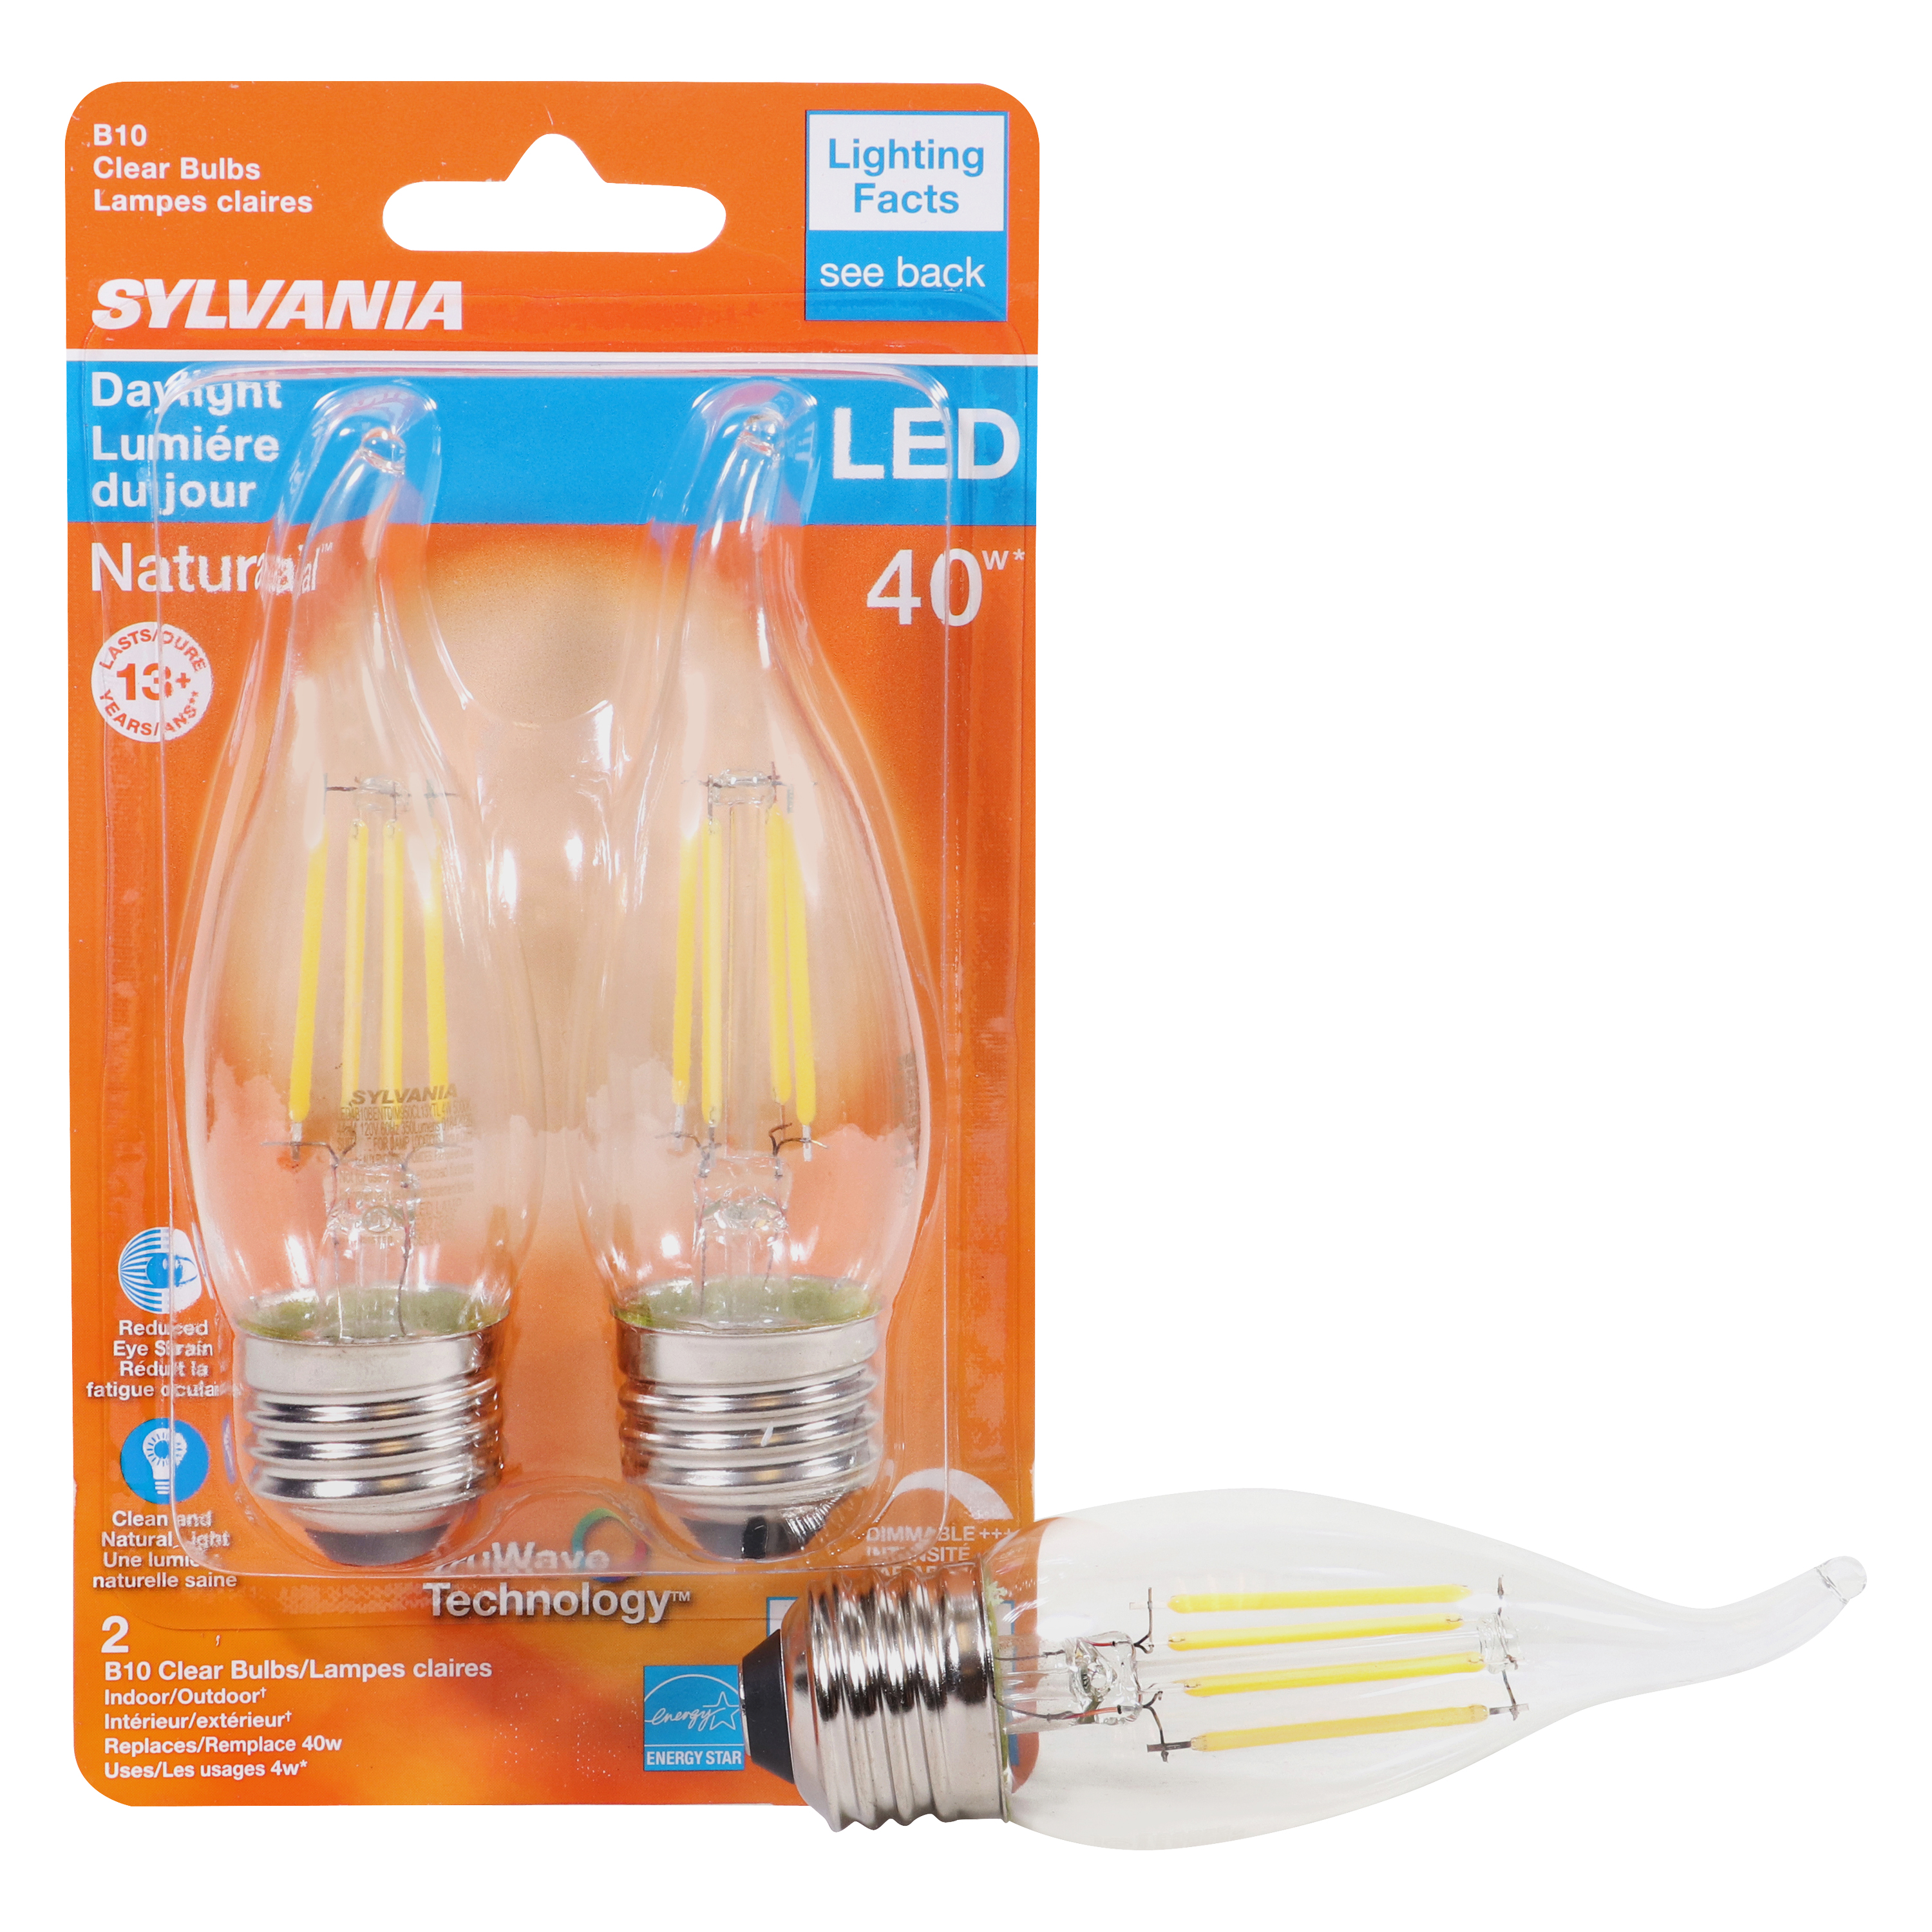 40792 Natural LED Bulb, Decorative, B10 Bent Tip Lamp, 40 W Equivalent, E26 Lamp Base, Dimmable, Clear